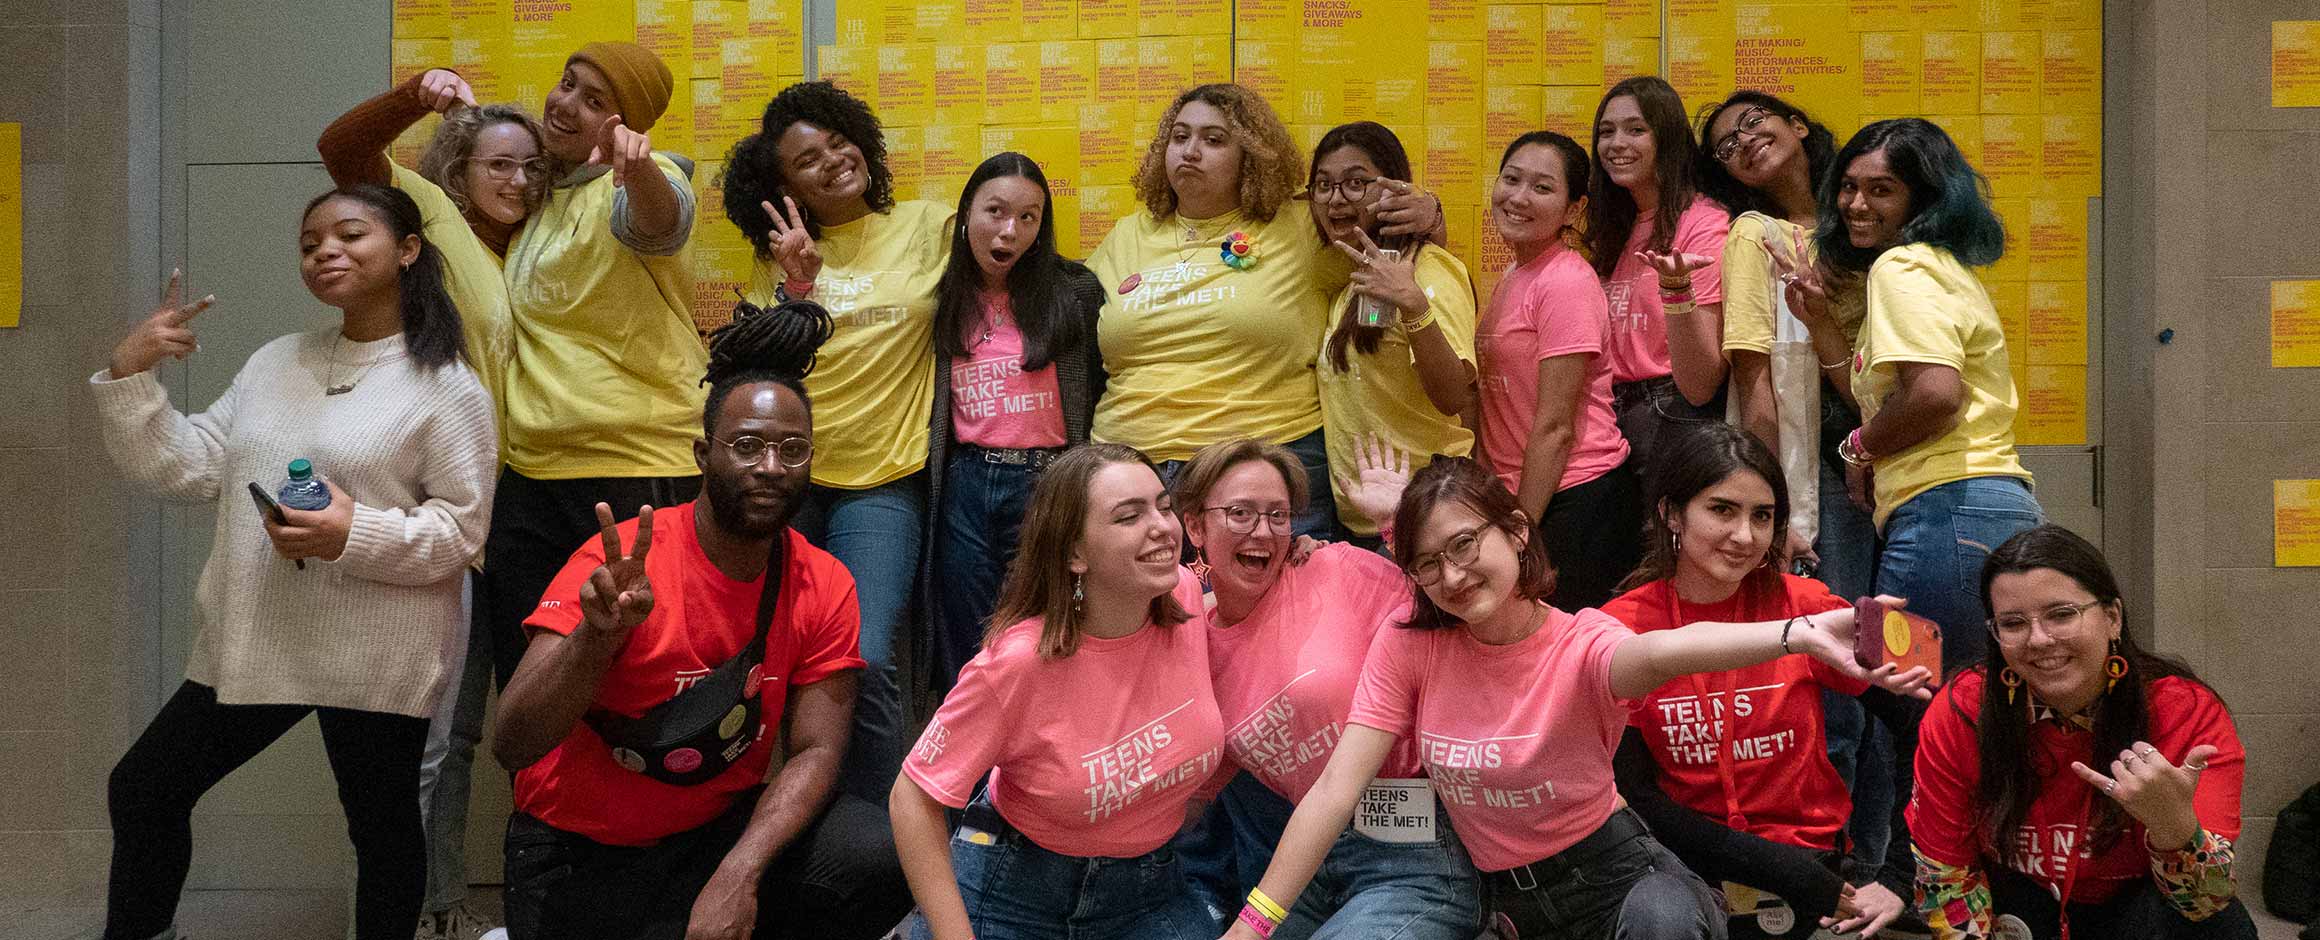 A group of teens are waving and making fun faces to the camera. They are wearing pink and yellow t-shirts, and look very happy.